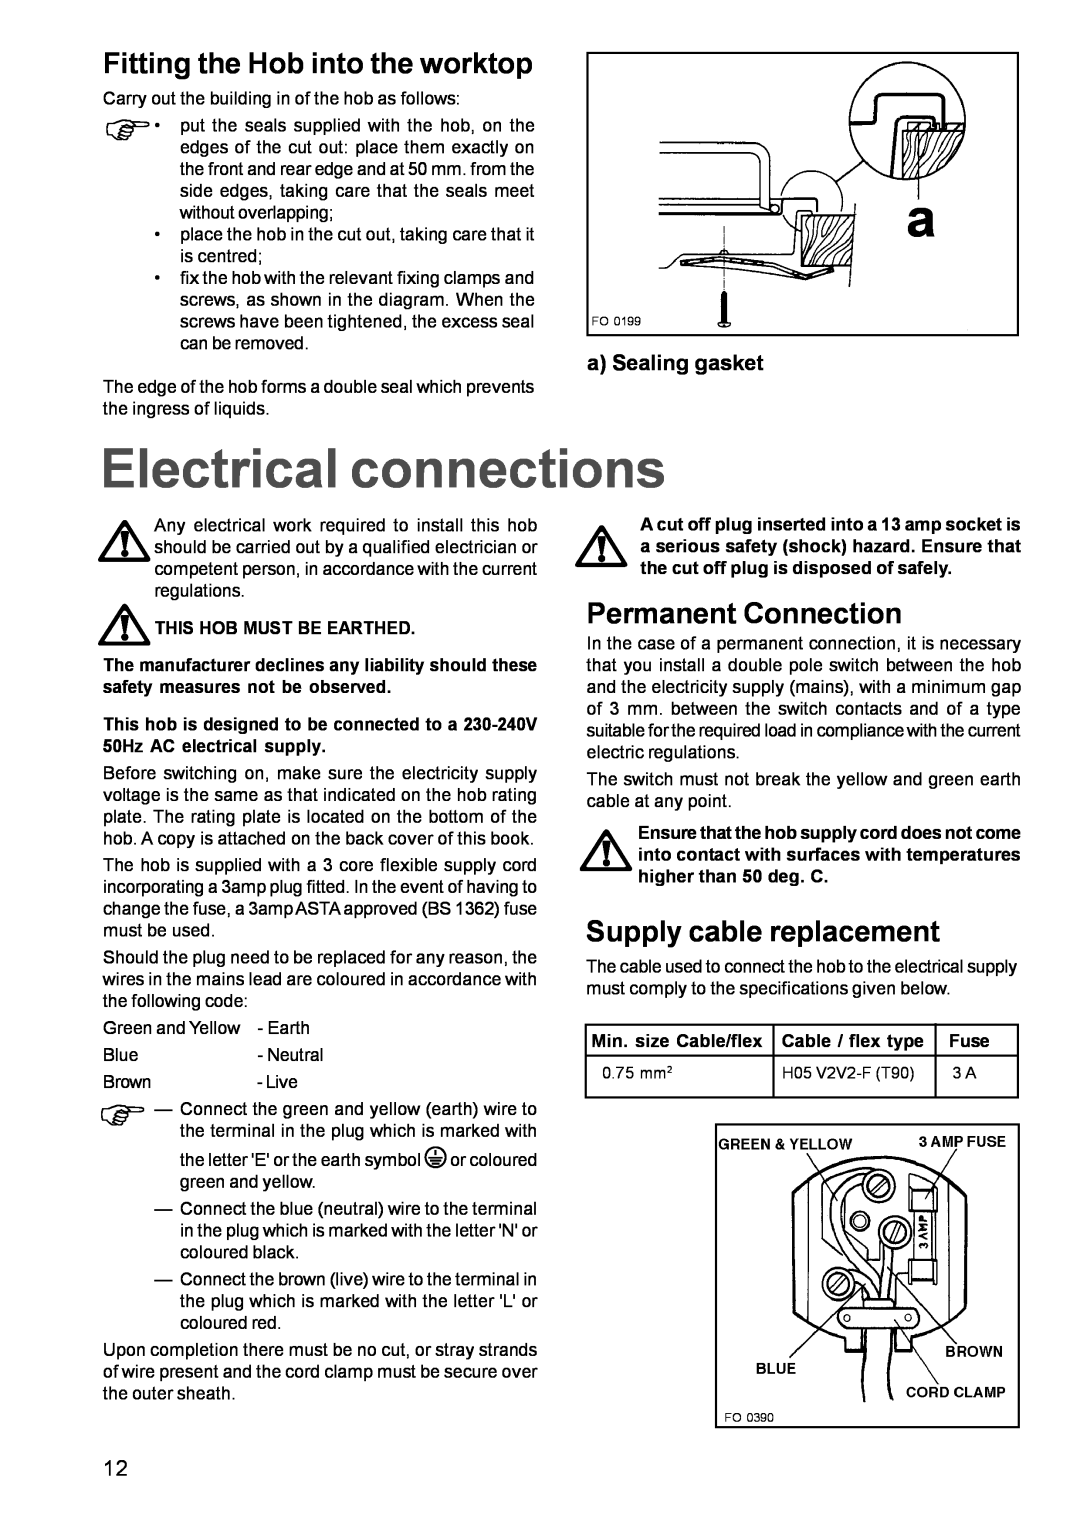 Electrolux EHG 680 manual Electrical connections, Fitting the Hob into the worktop, Permanent Connection, a Sealing gasket 